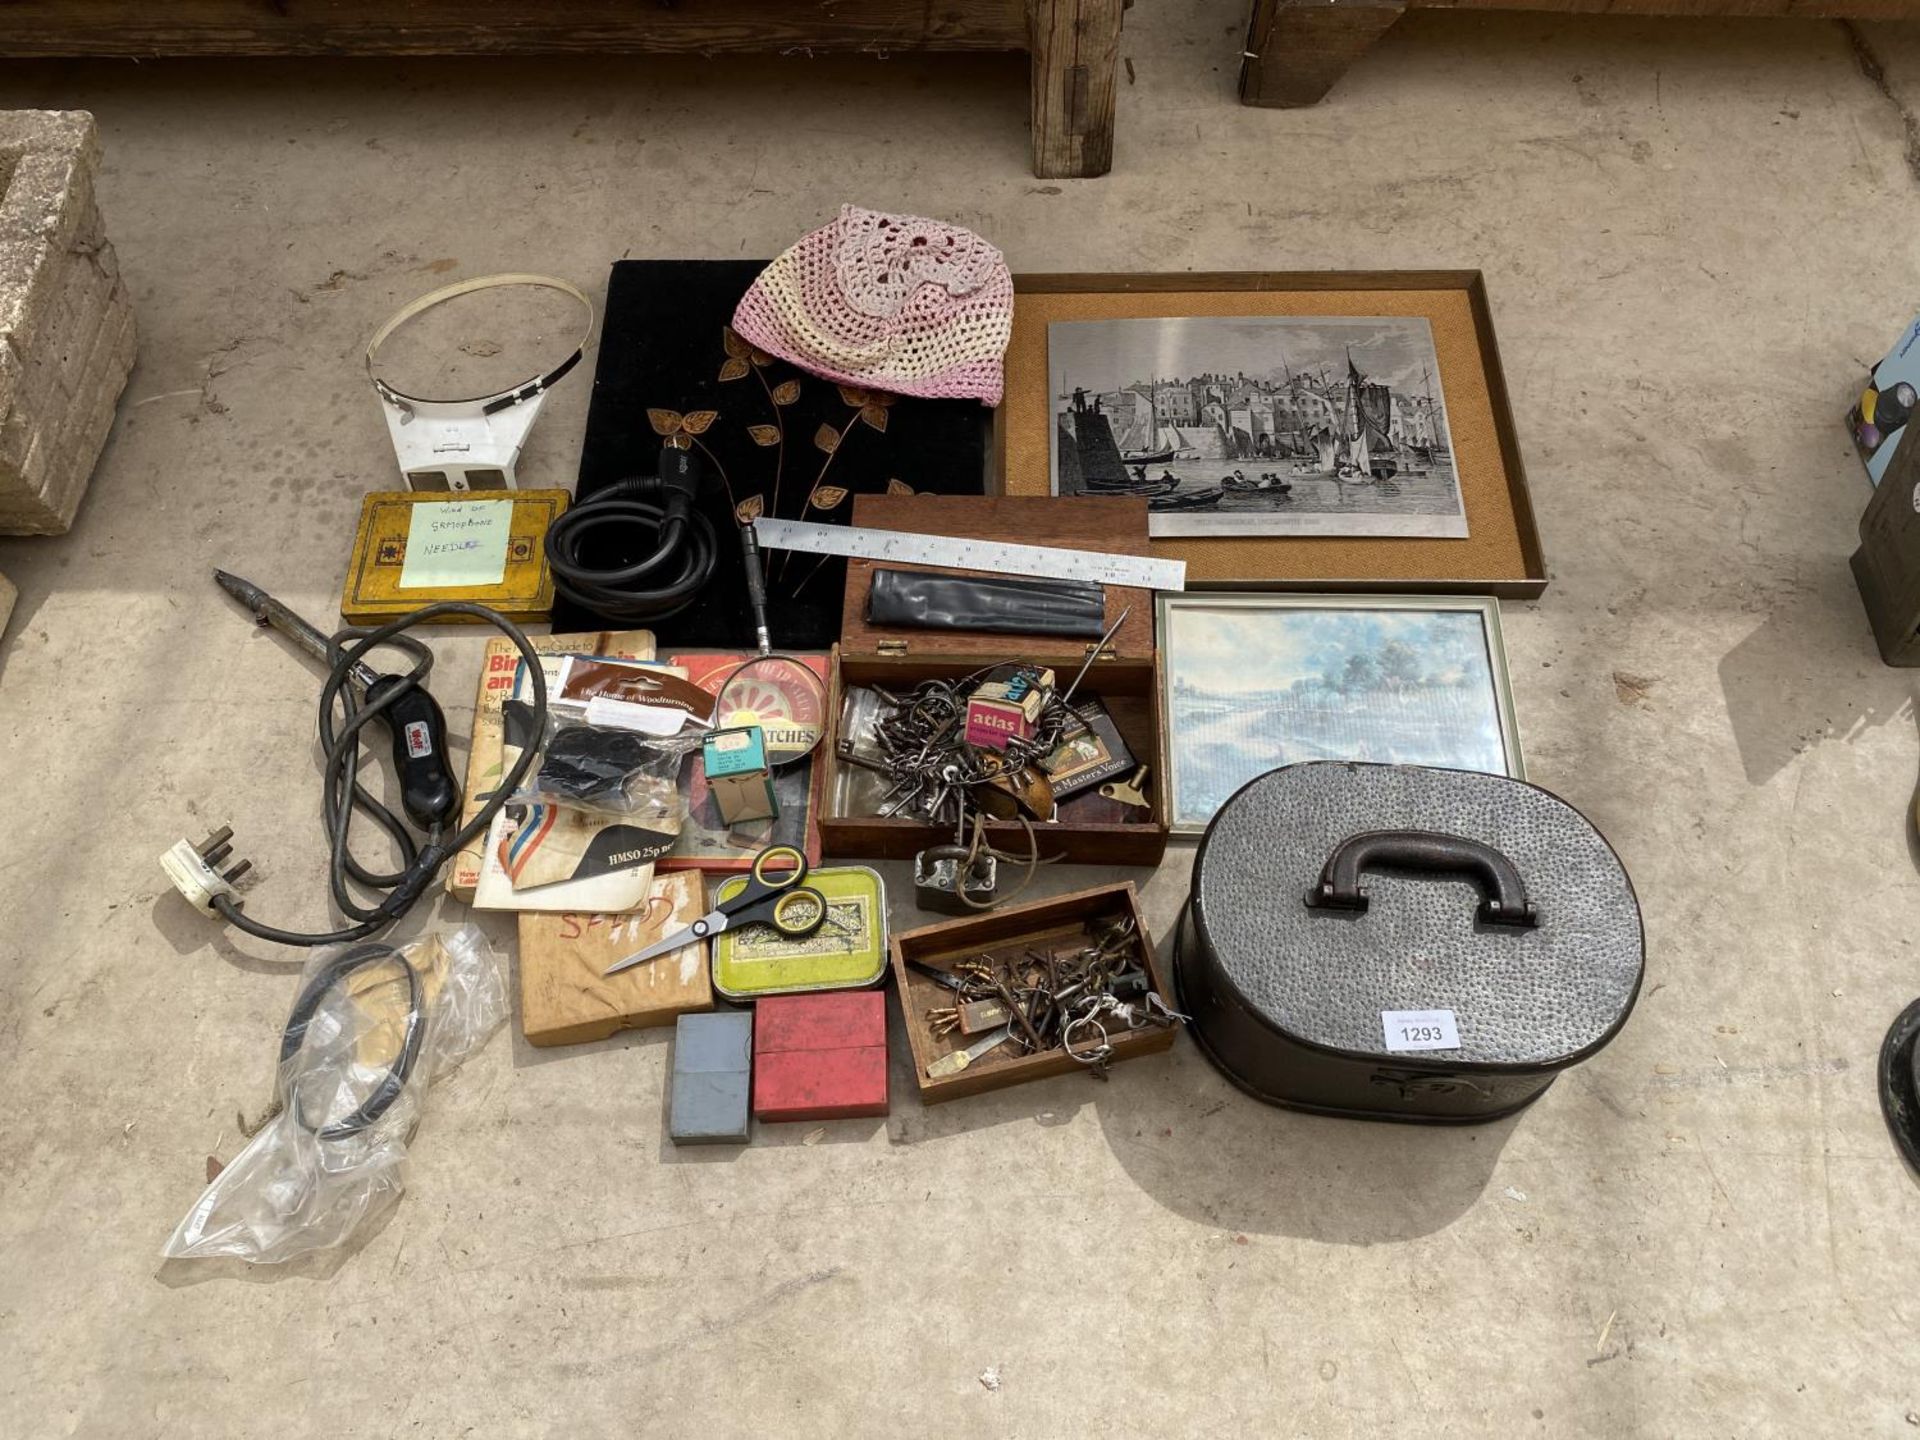 AN ASSORTMENT OF ITEMS TO INCLUDE VINTAGE KEYS, A SOLDERING IRON AND A BIKE LOCK ETC